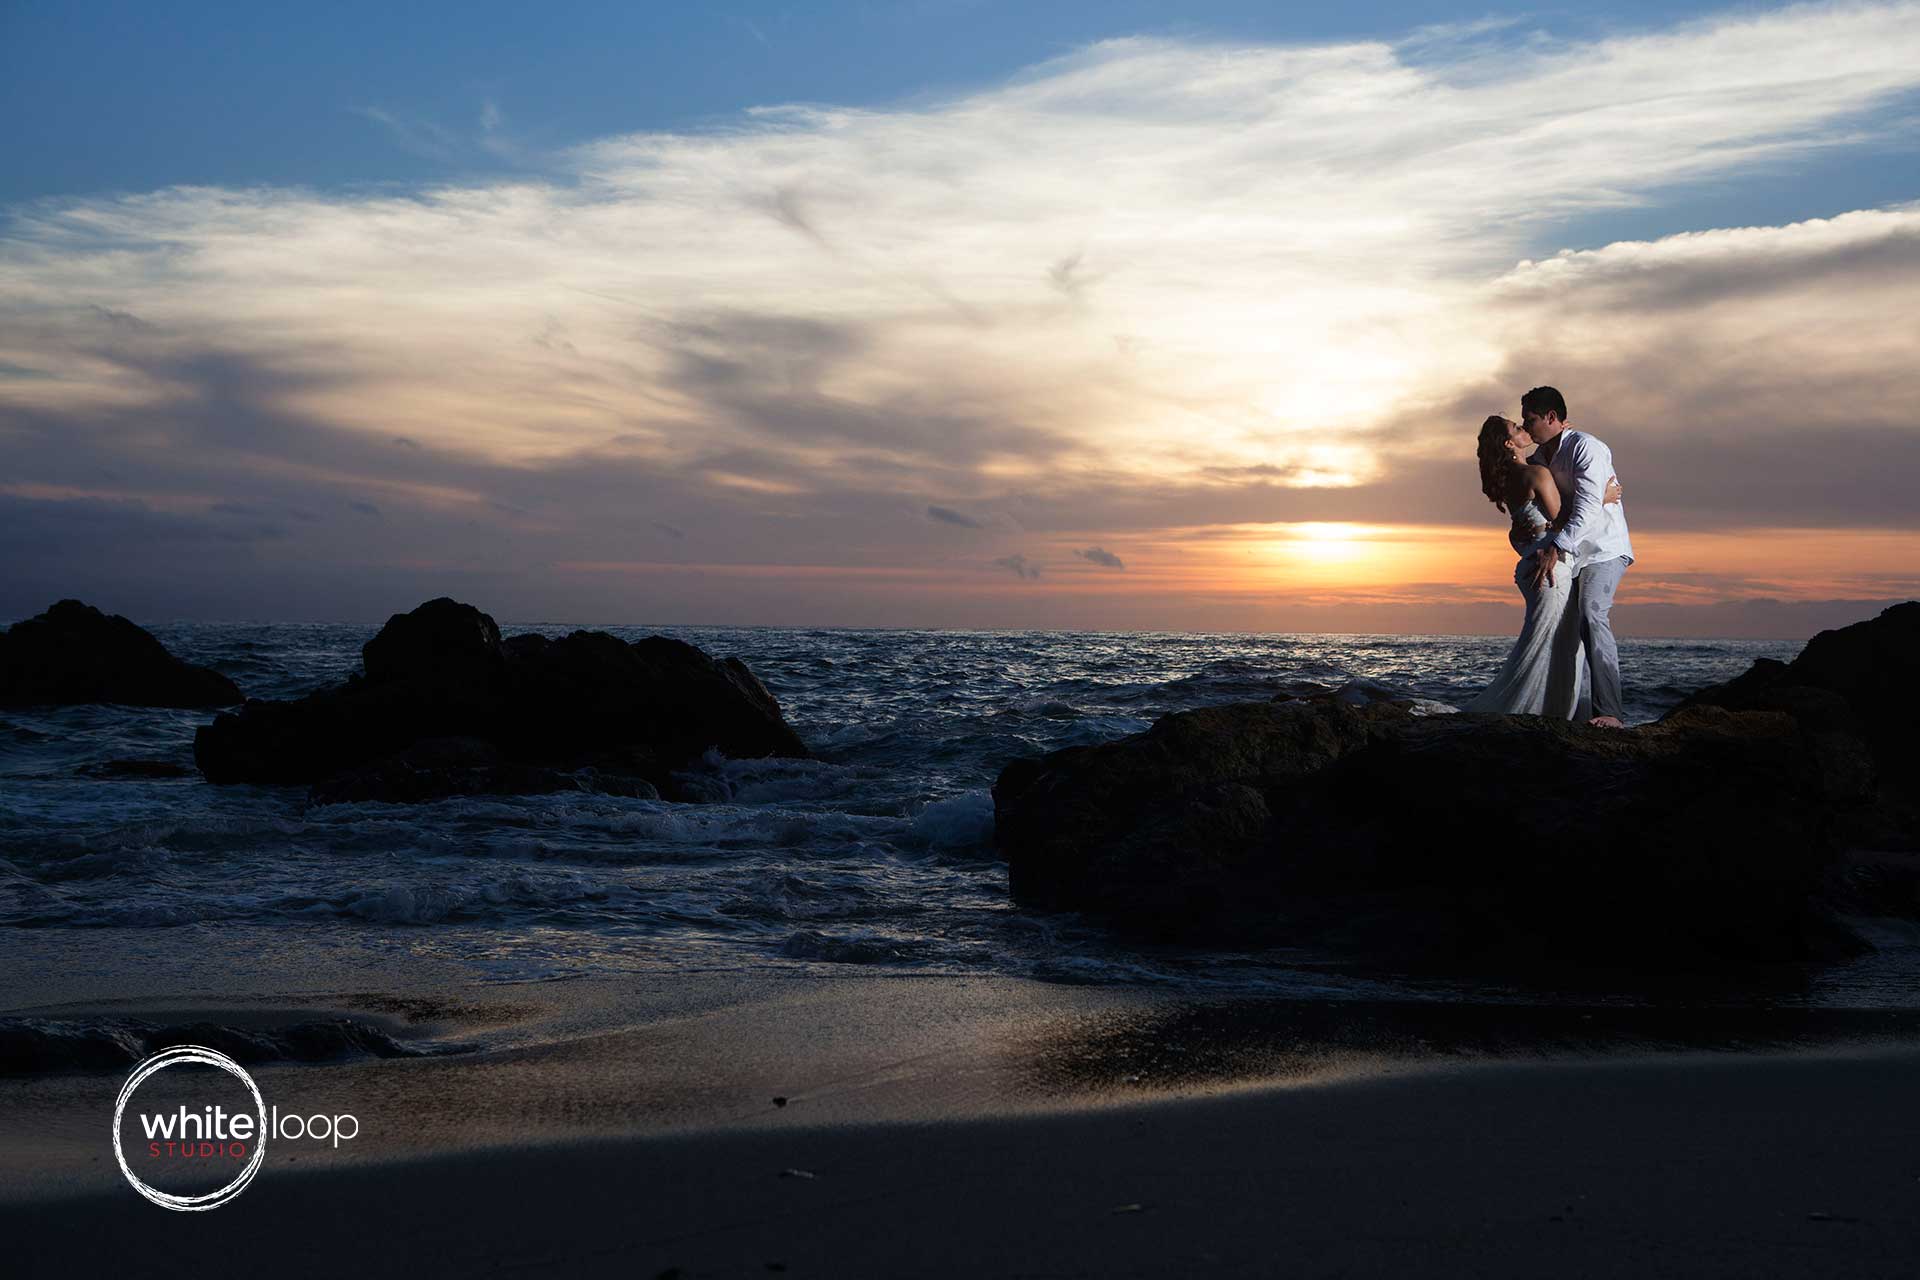 The groom and the bride embrace on top of a rock on the seashore.